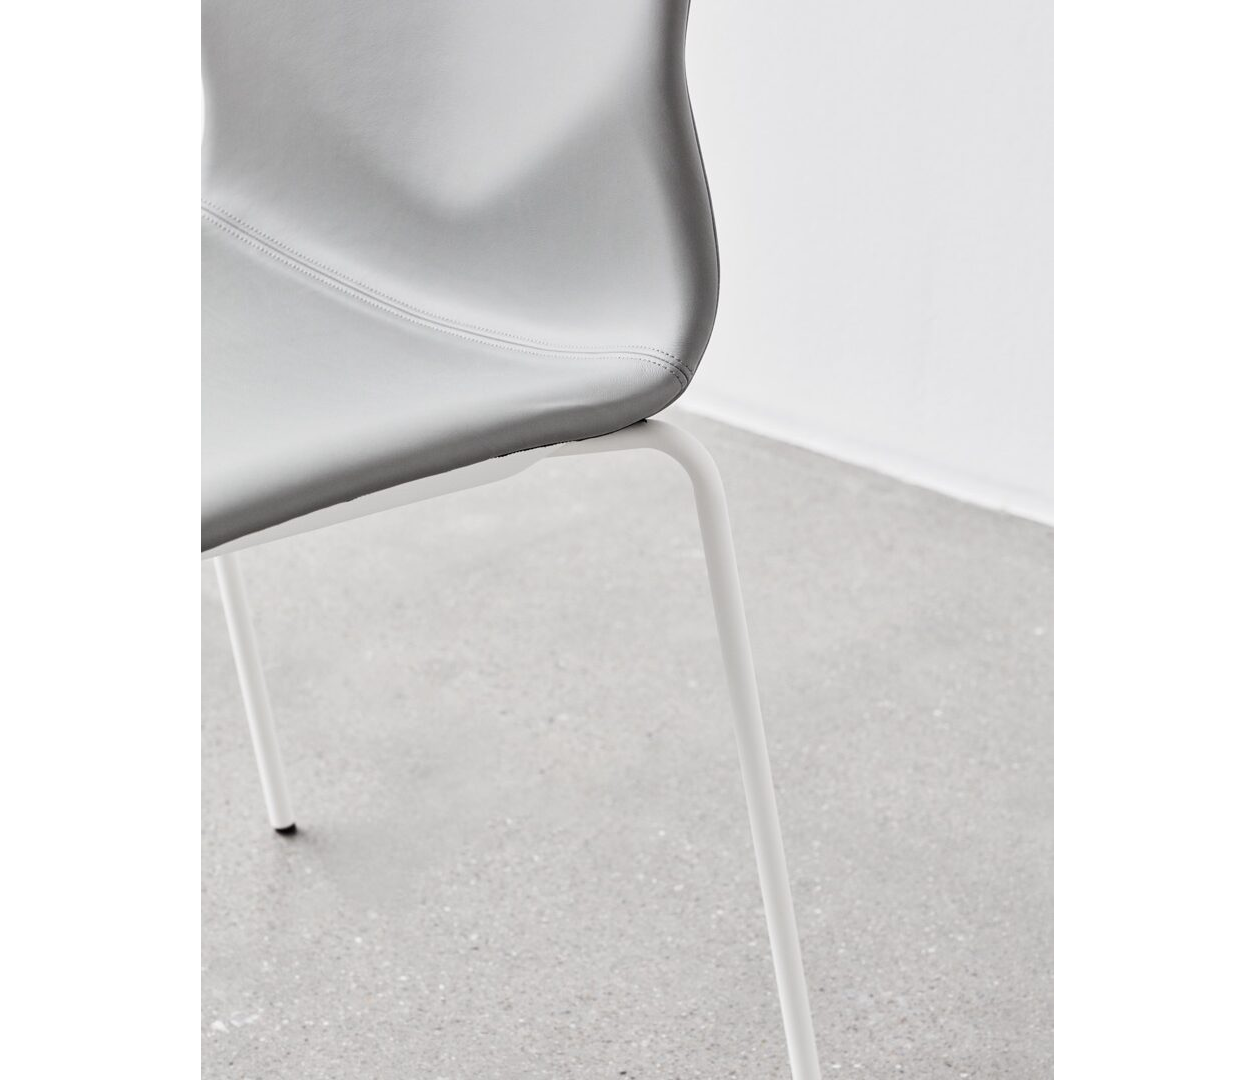 OCEE&FOUR – Chairs – FourSure 44 – Details Image 14 Large